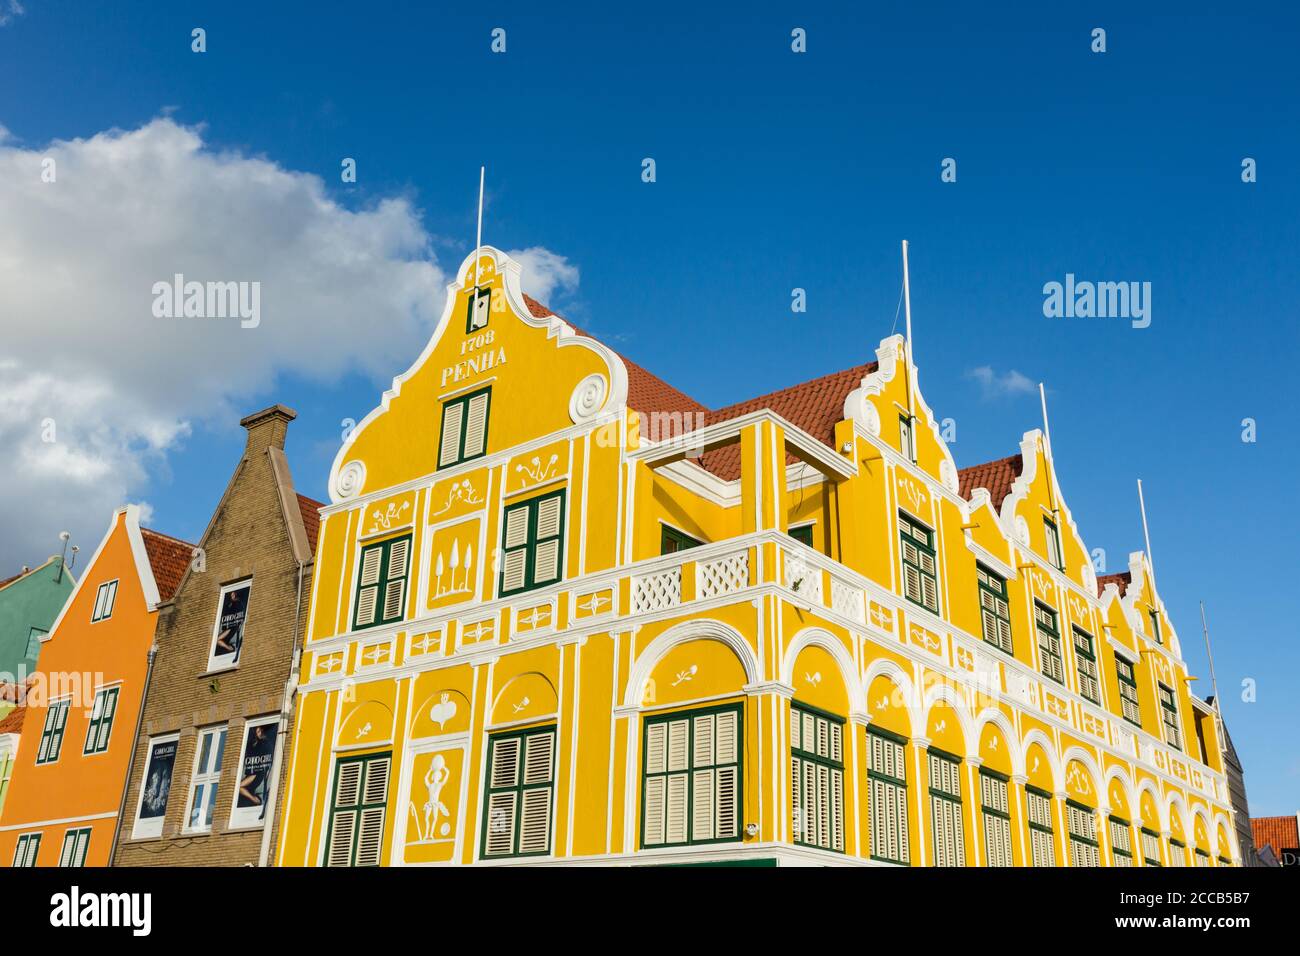 The Penha Building was built in 1708 in Dutch colonial style and is now a department store on the corner Handelskade and Breedestraat in Willemstad, t Stock Photo